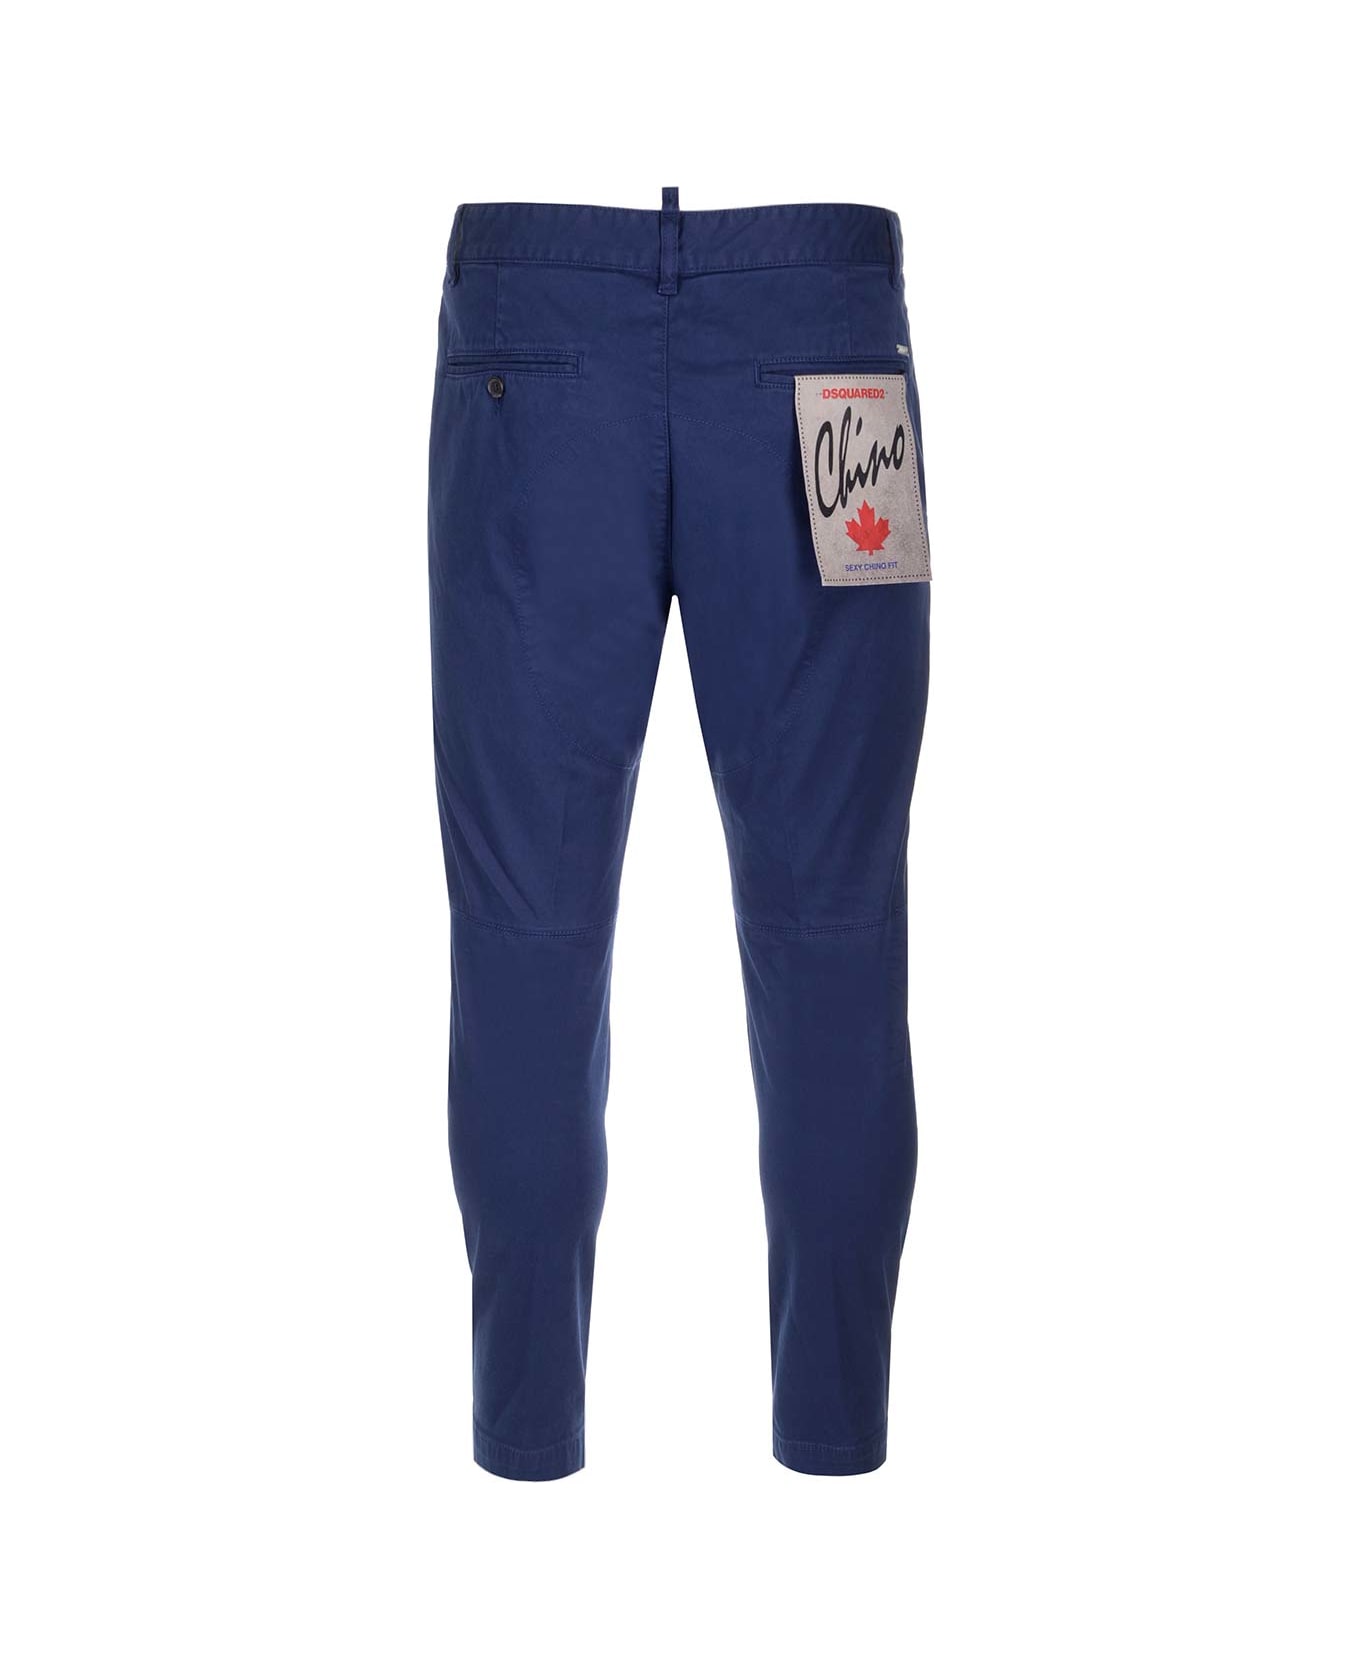 Dsquared2 Sexy Chino Pants - Navy ボトムス